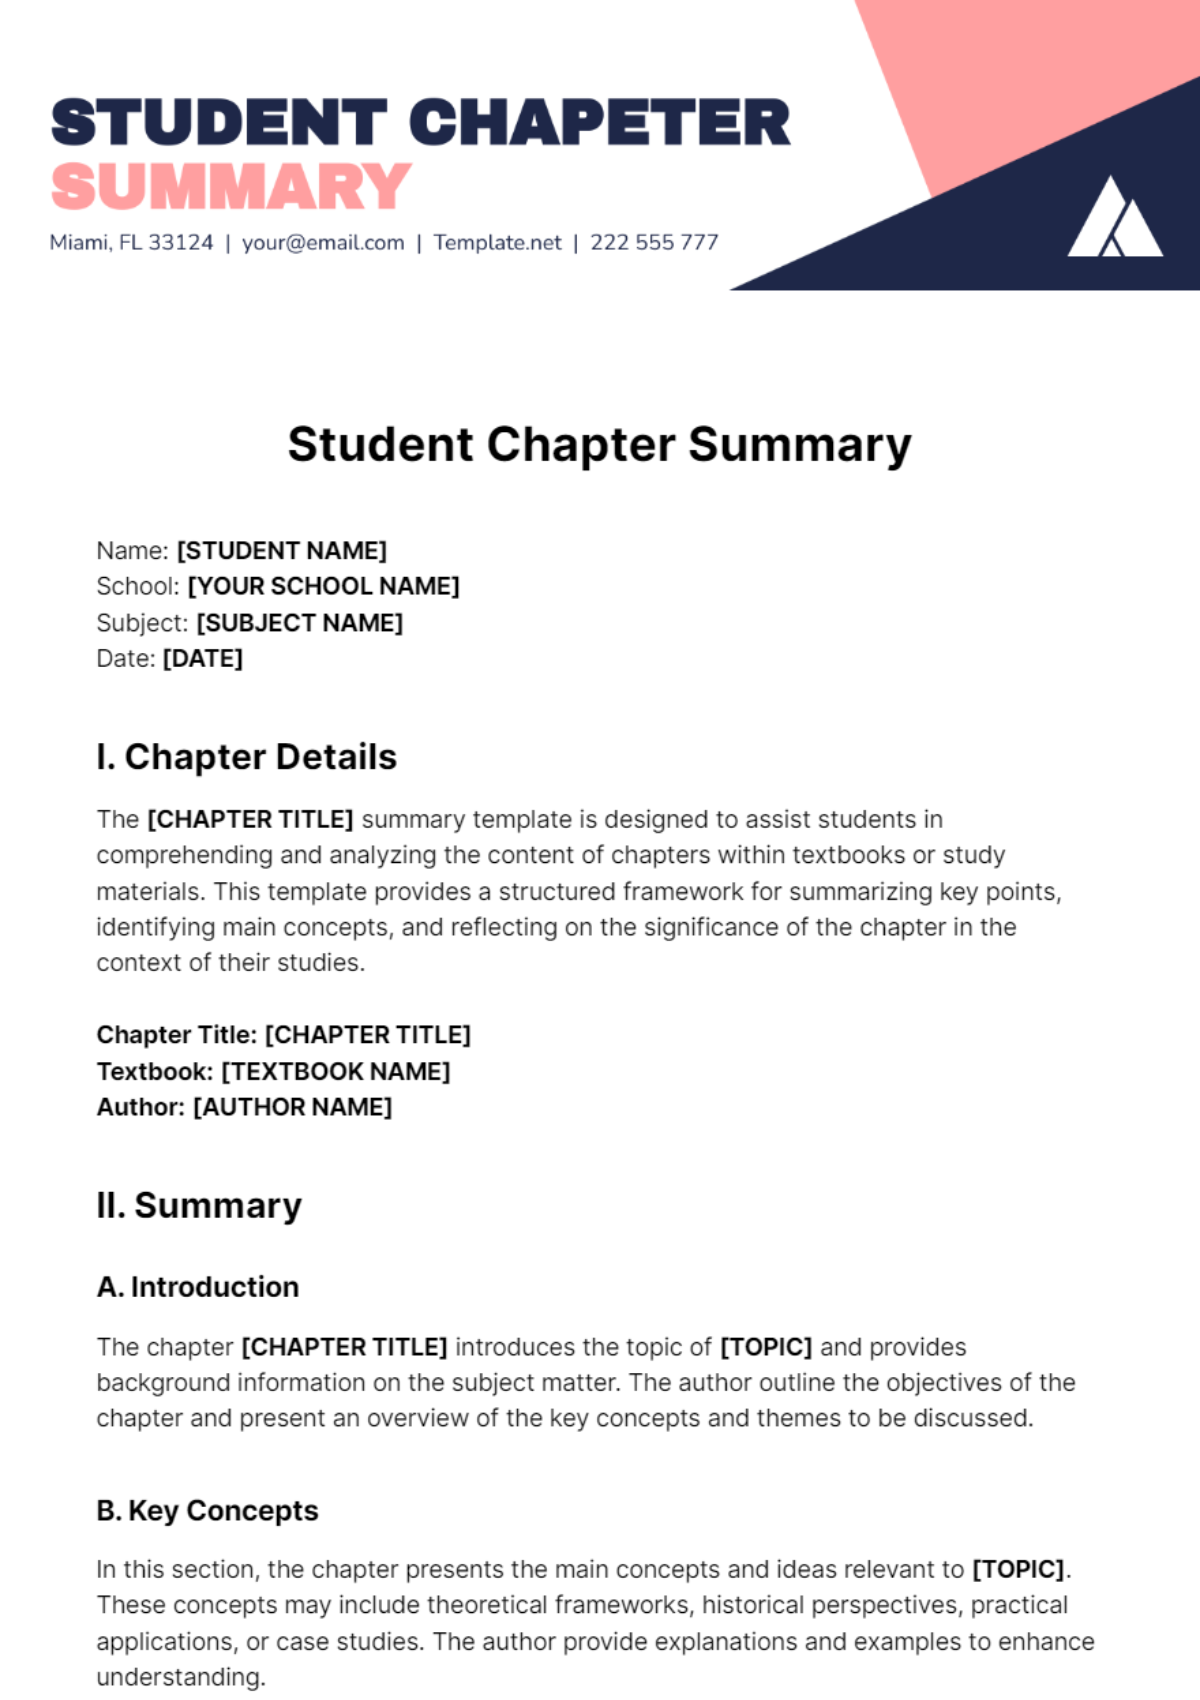 Student Chapter Summary Template